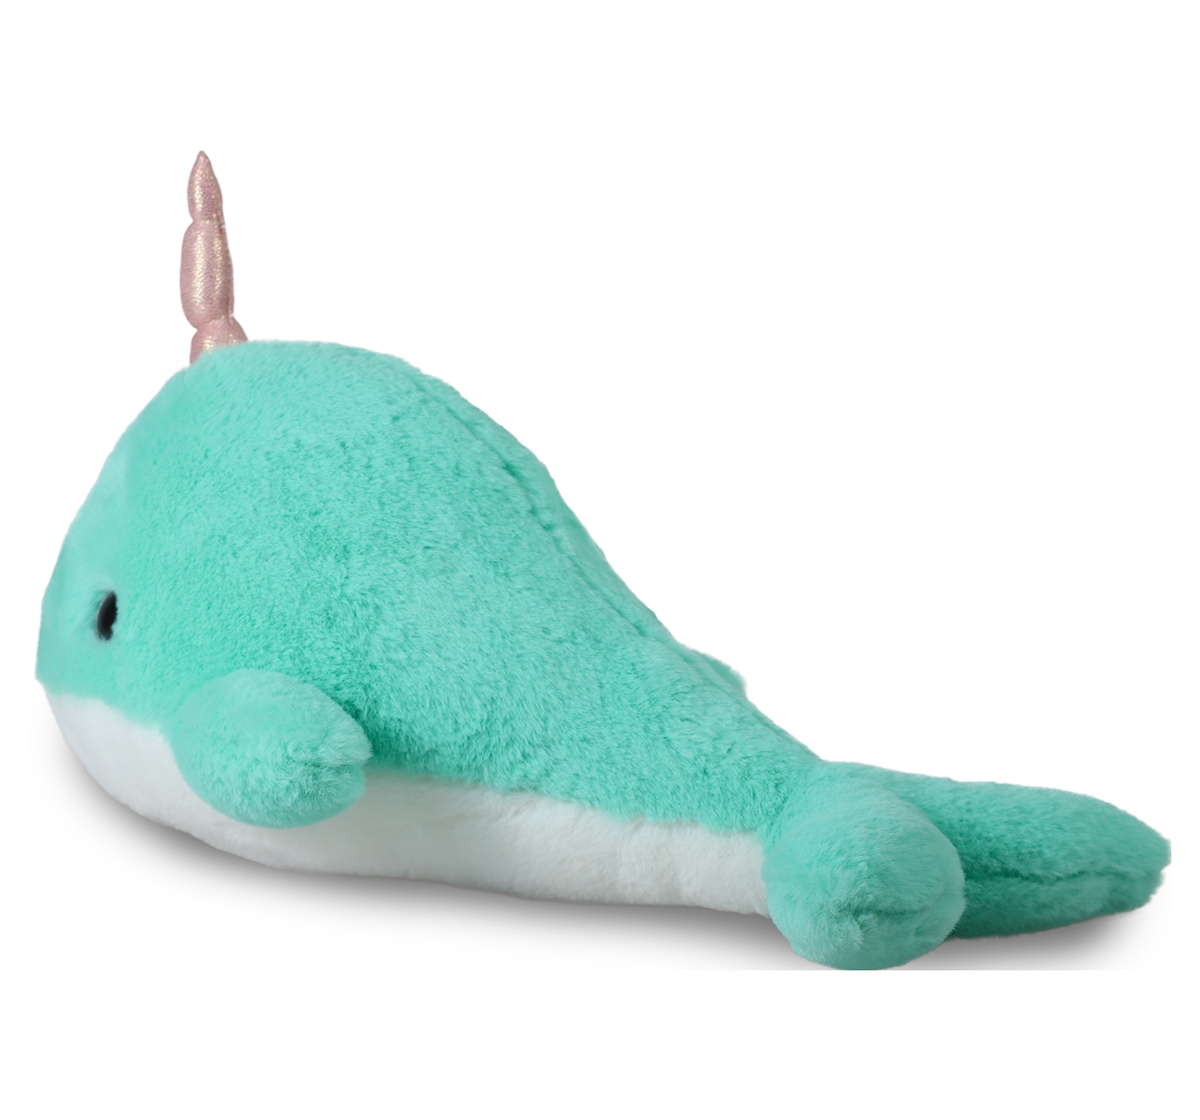 Mirada | Adorable Stuffed Plush Narwhal by Mirada, Soft Toys for Kids of All Ages, 3Y+, Green, 40cm 2